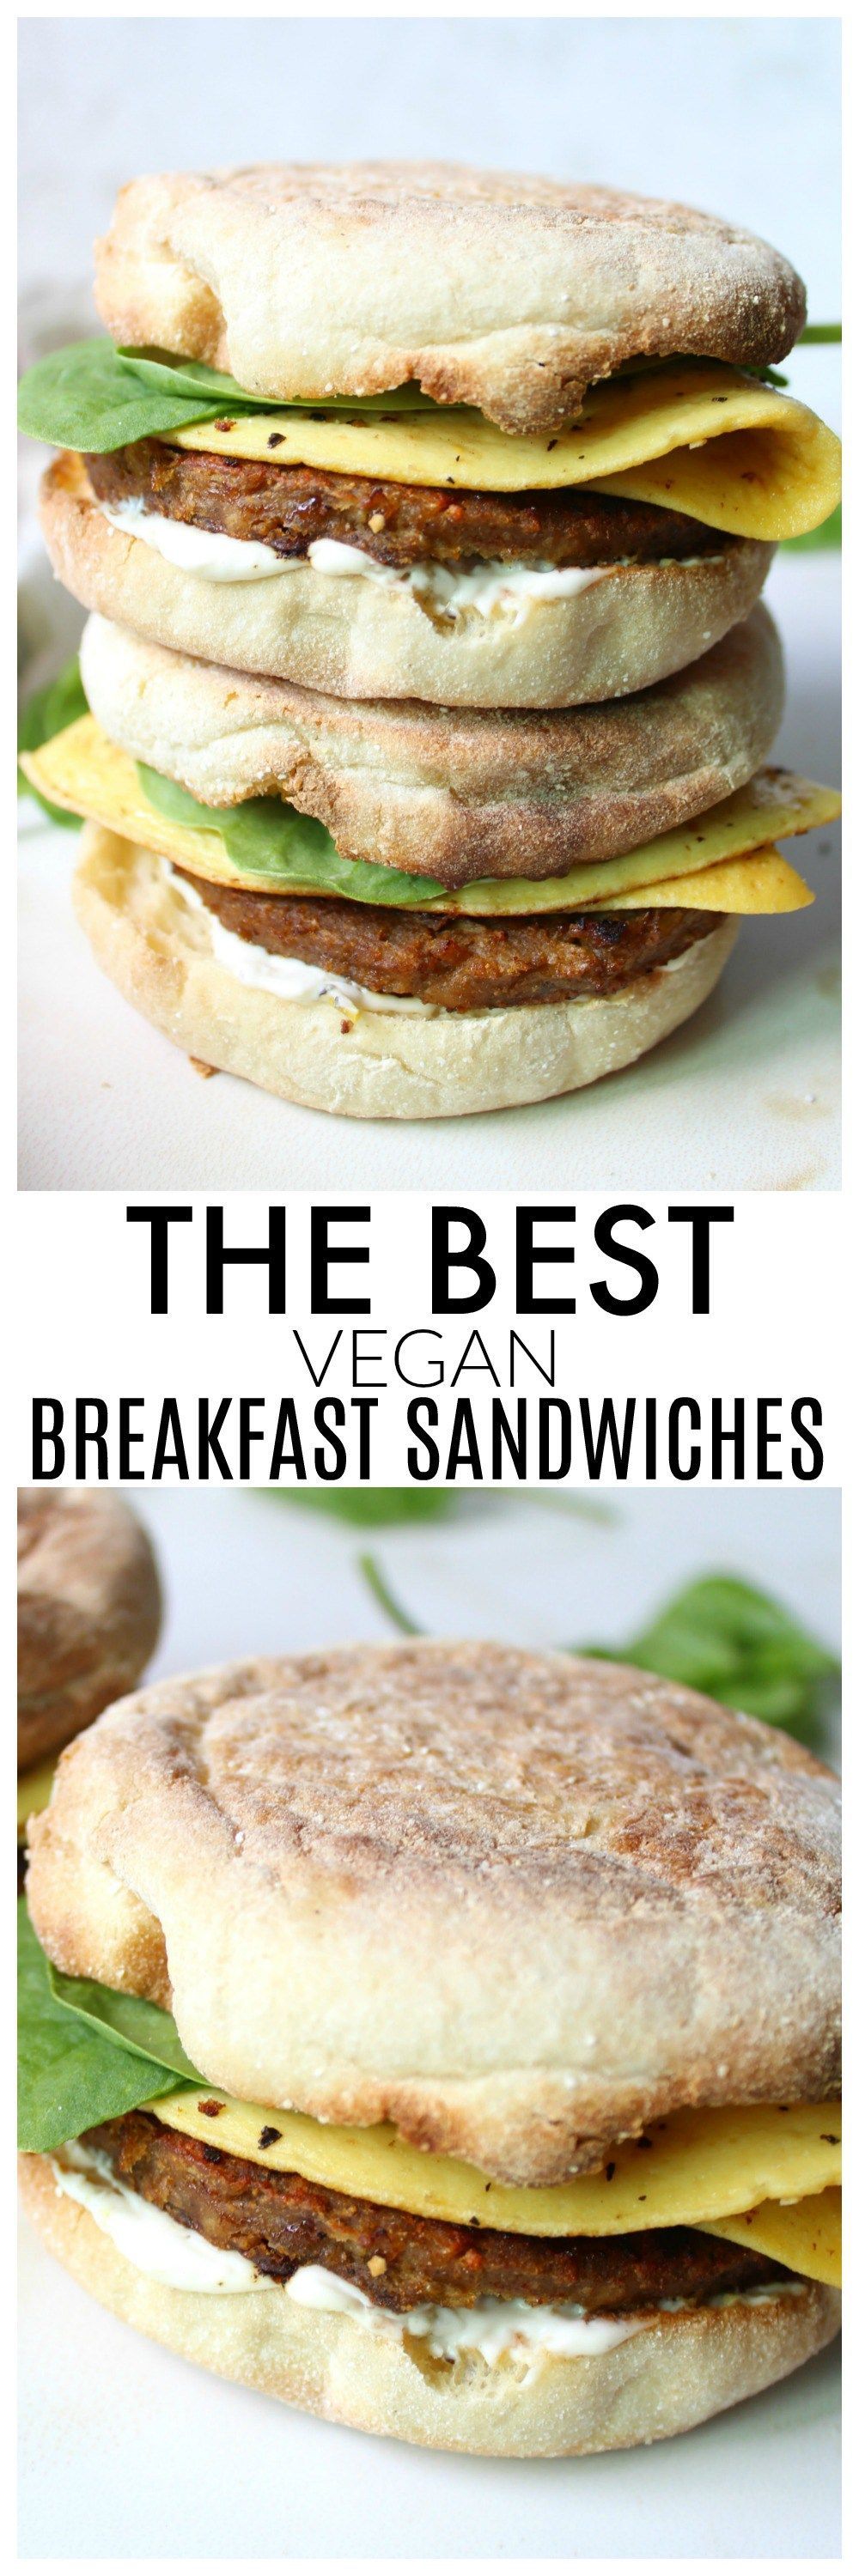 A simple and delicious take on a classic breakfast takeout meal – these really are The Best Vegan Breakfast Sandwiches around! |